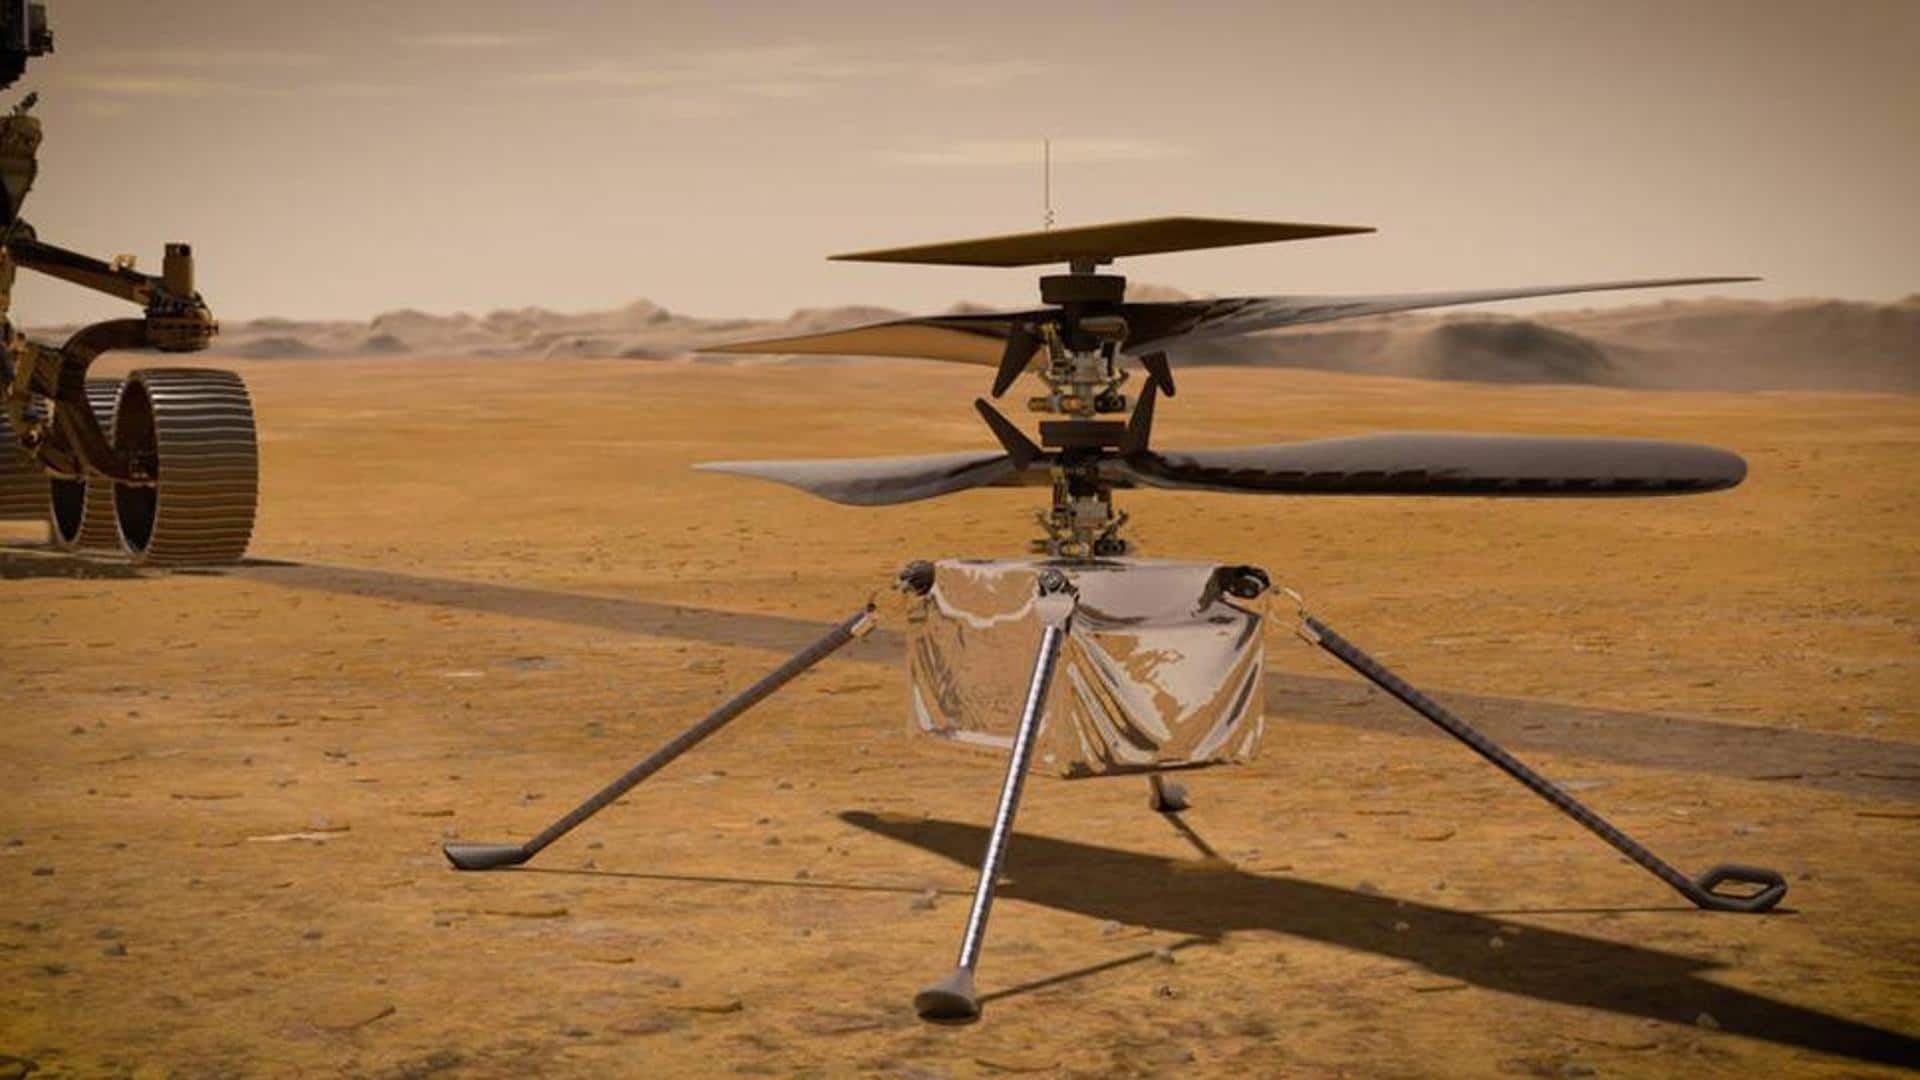 NASA's Mars Helicopter Ingenuity breaks records, flies higher than ever